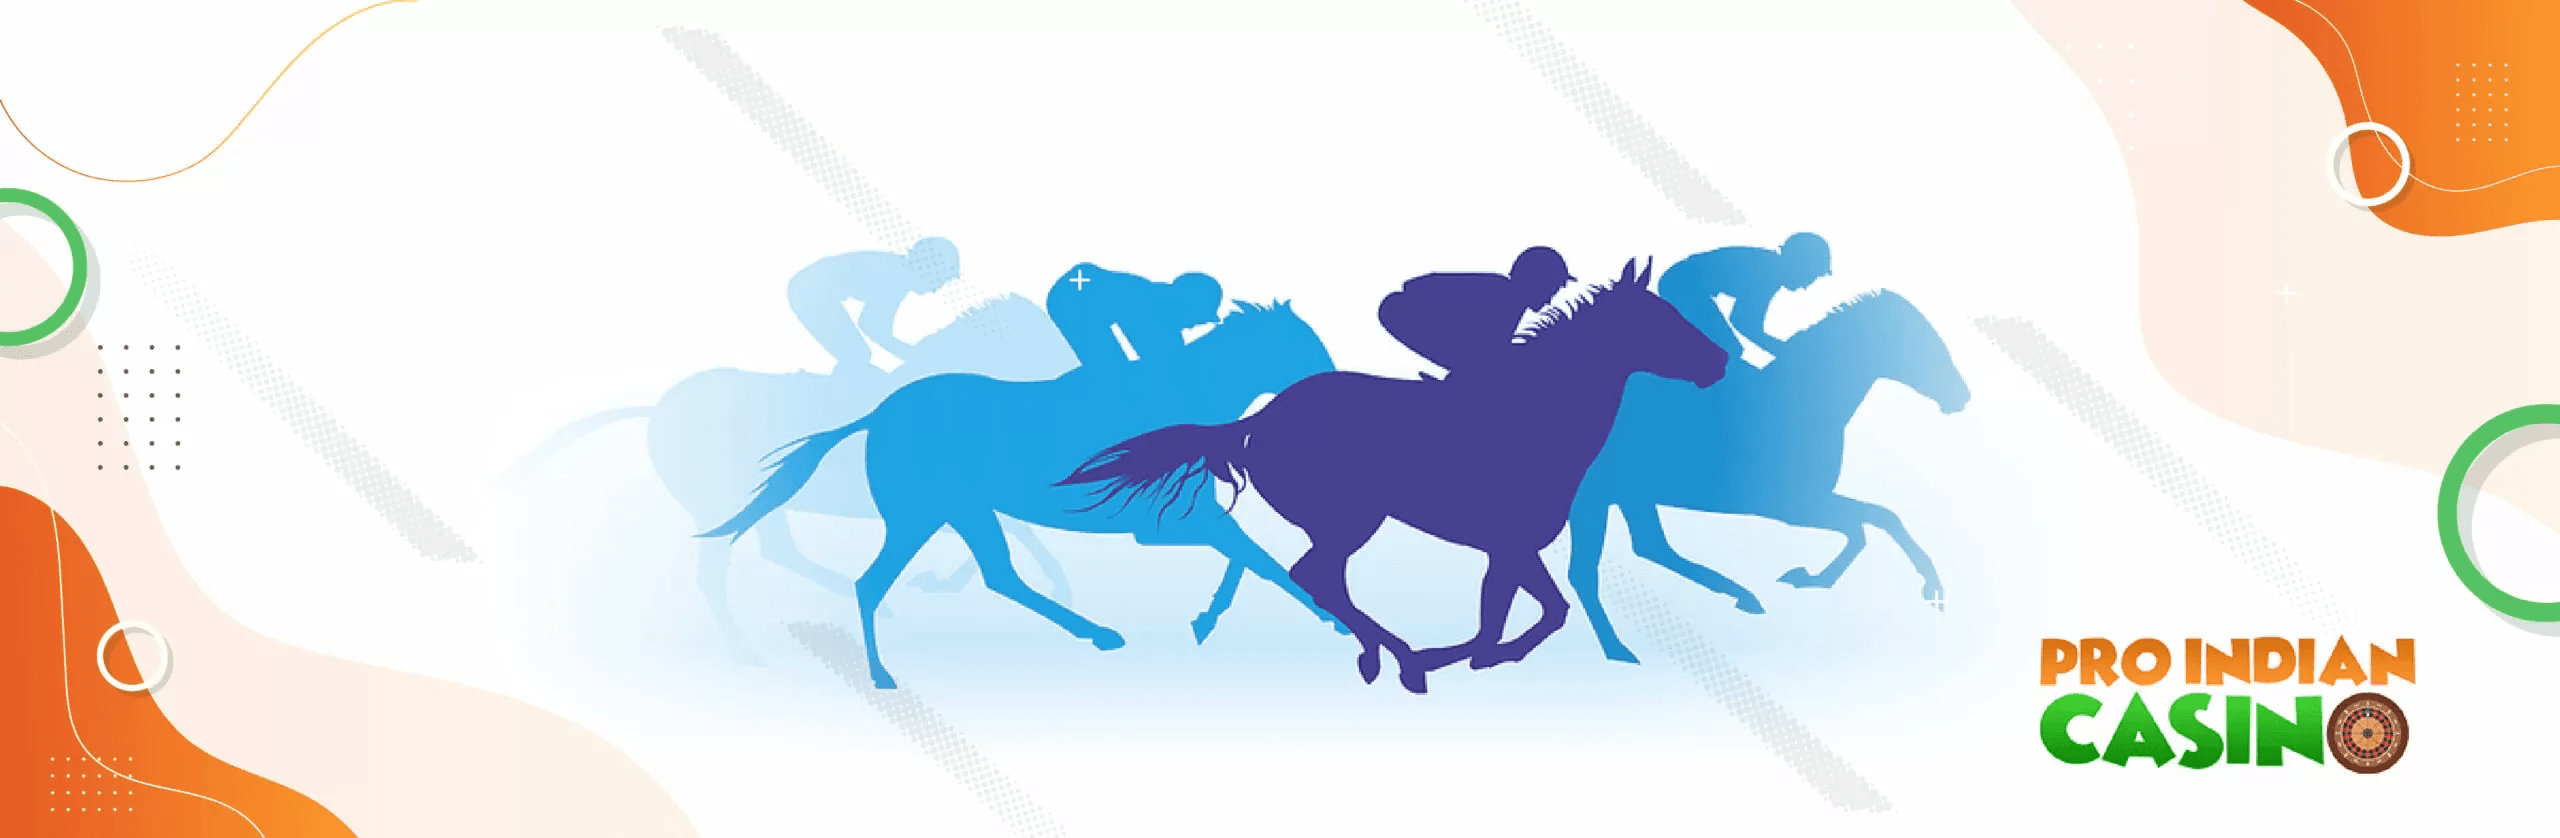 horse-betting-banner-scaled-1.webp-min